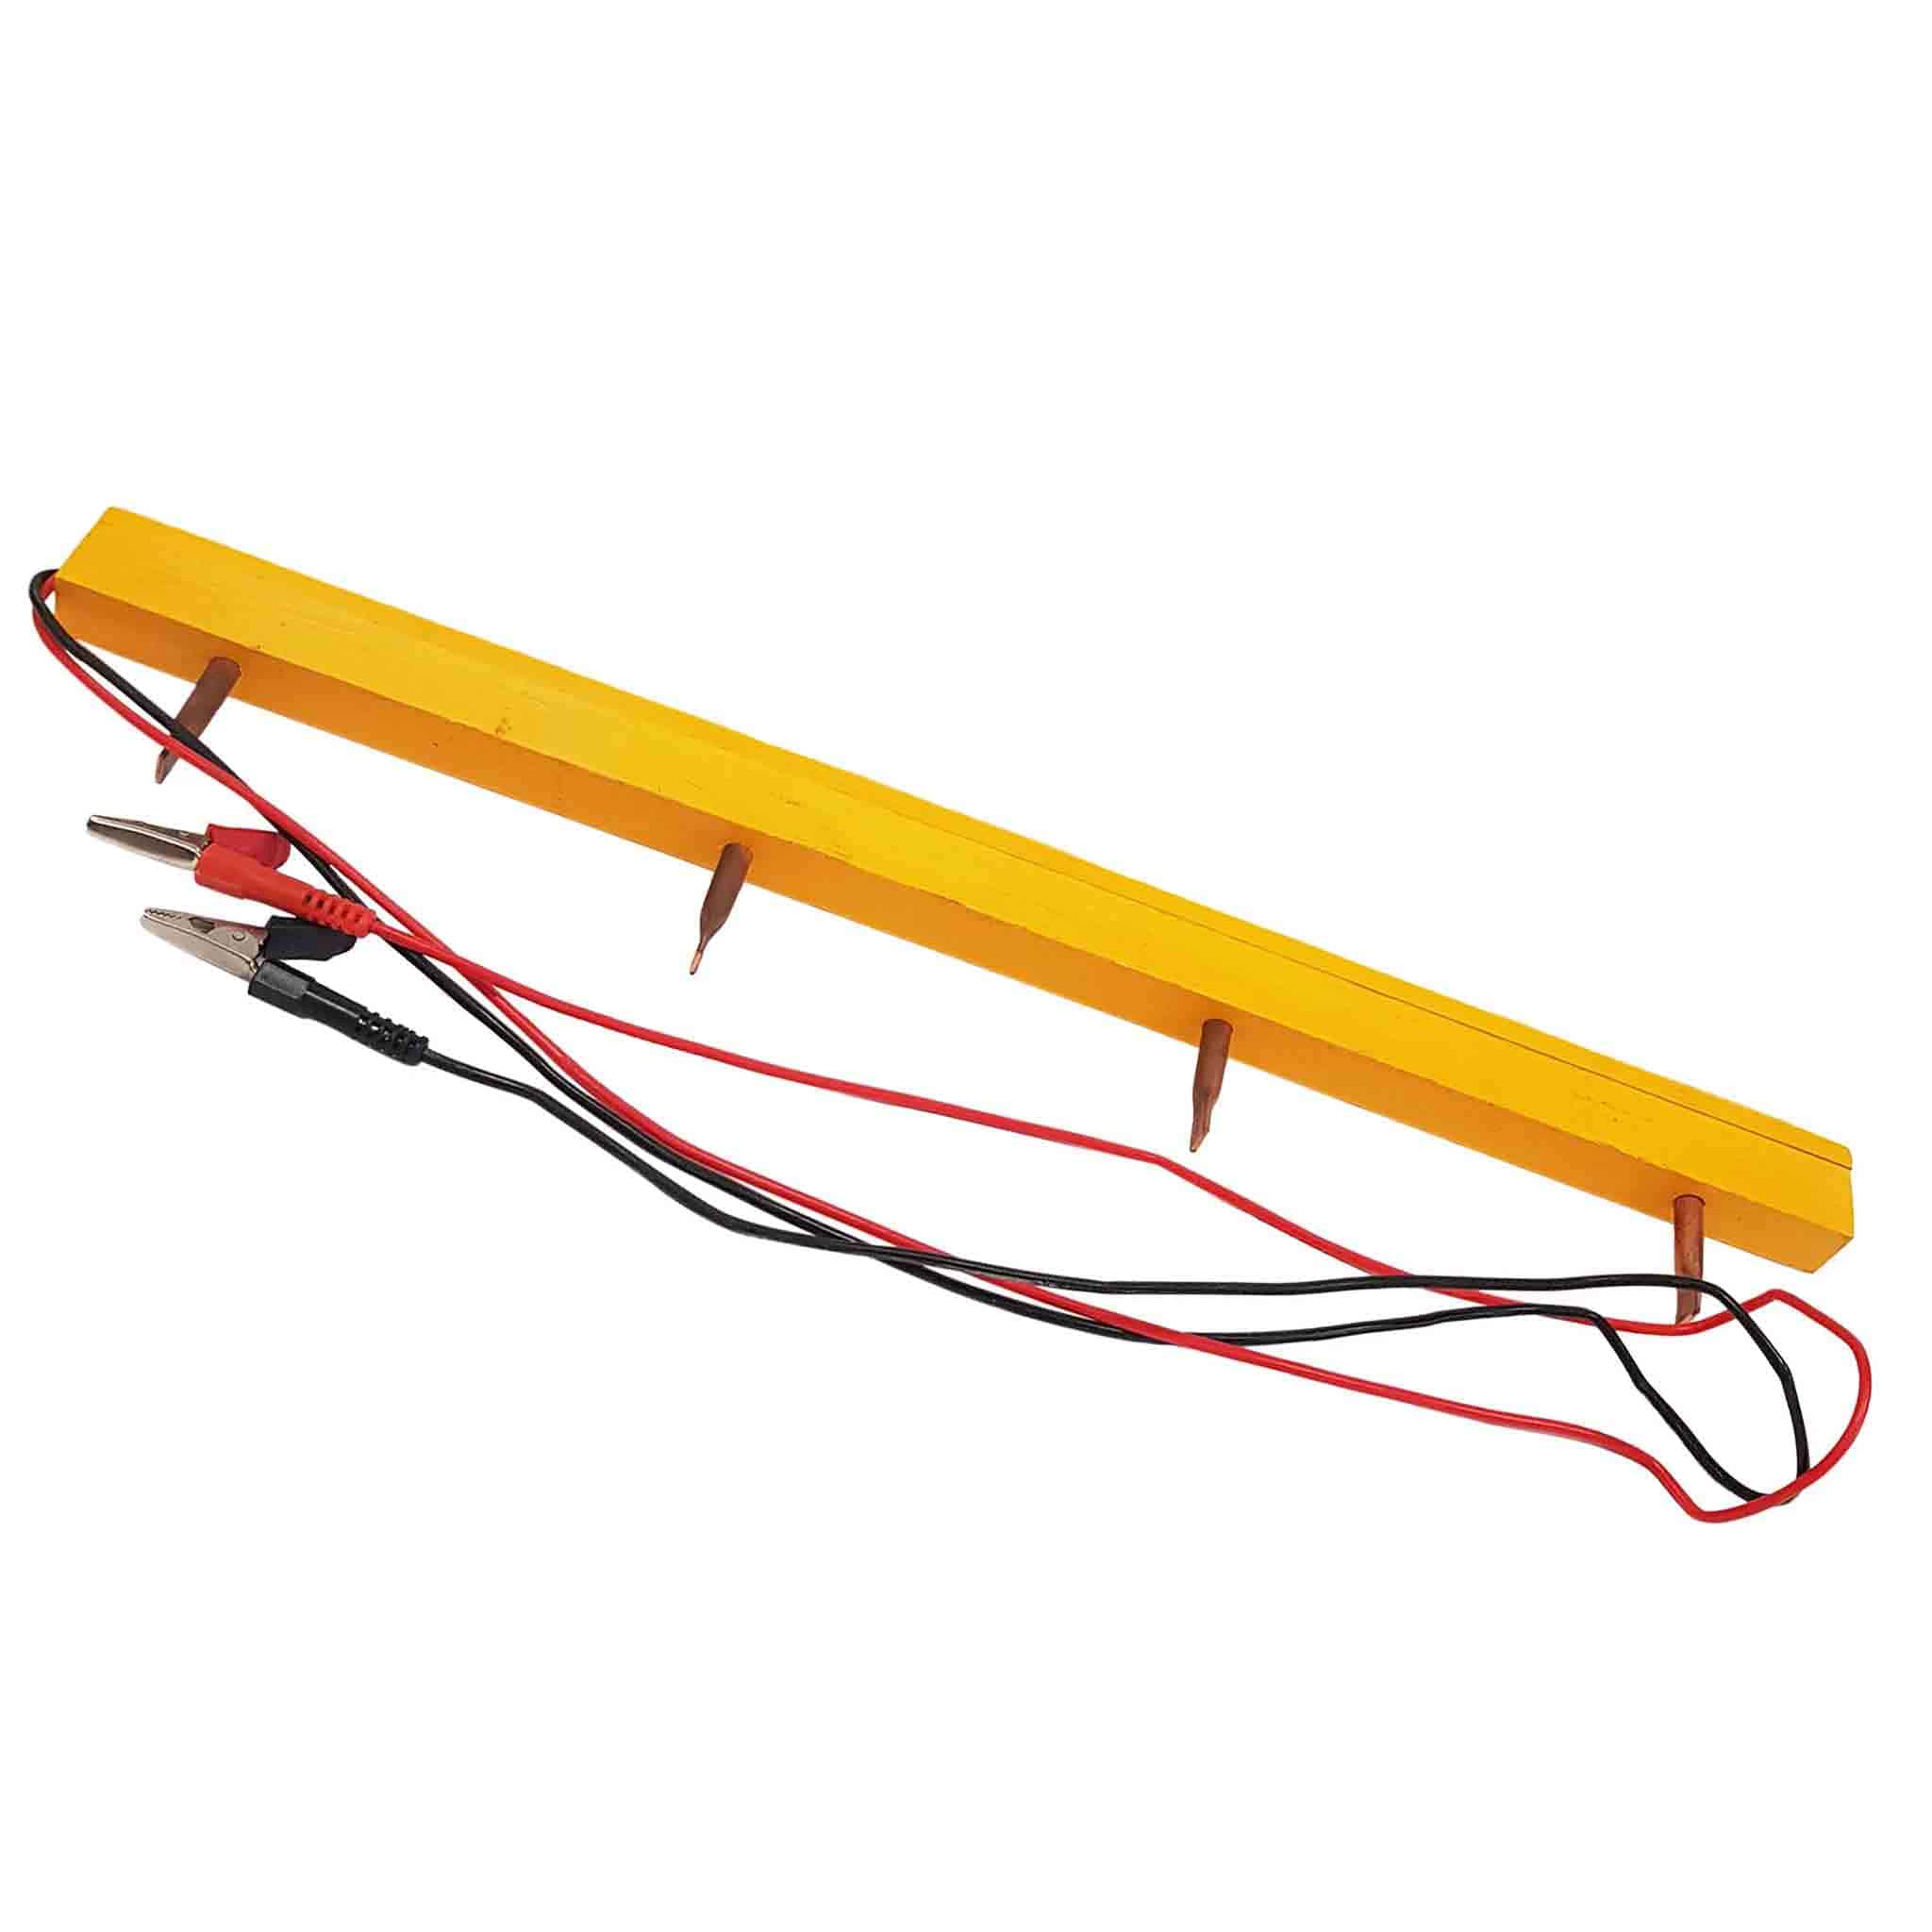 Electric Wiring Embedder Tool - Tools collection by Buzzbee Beekeeping Supplies